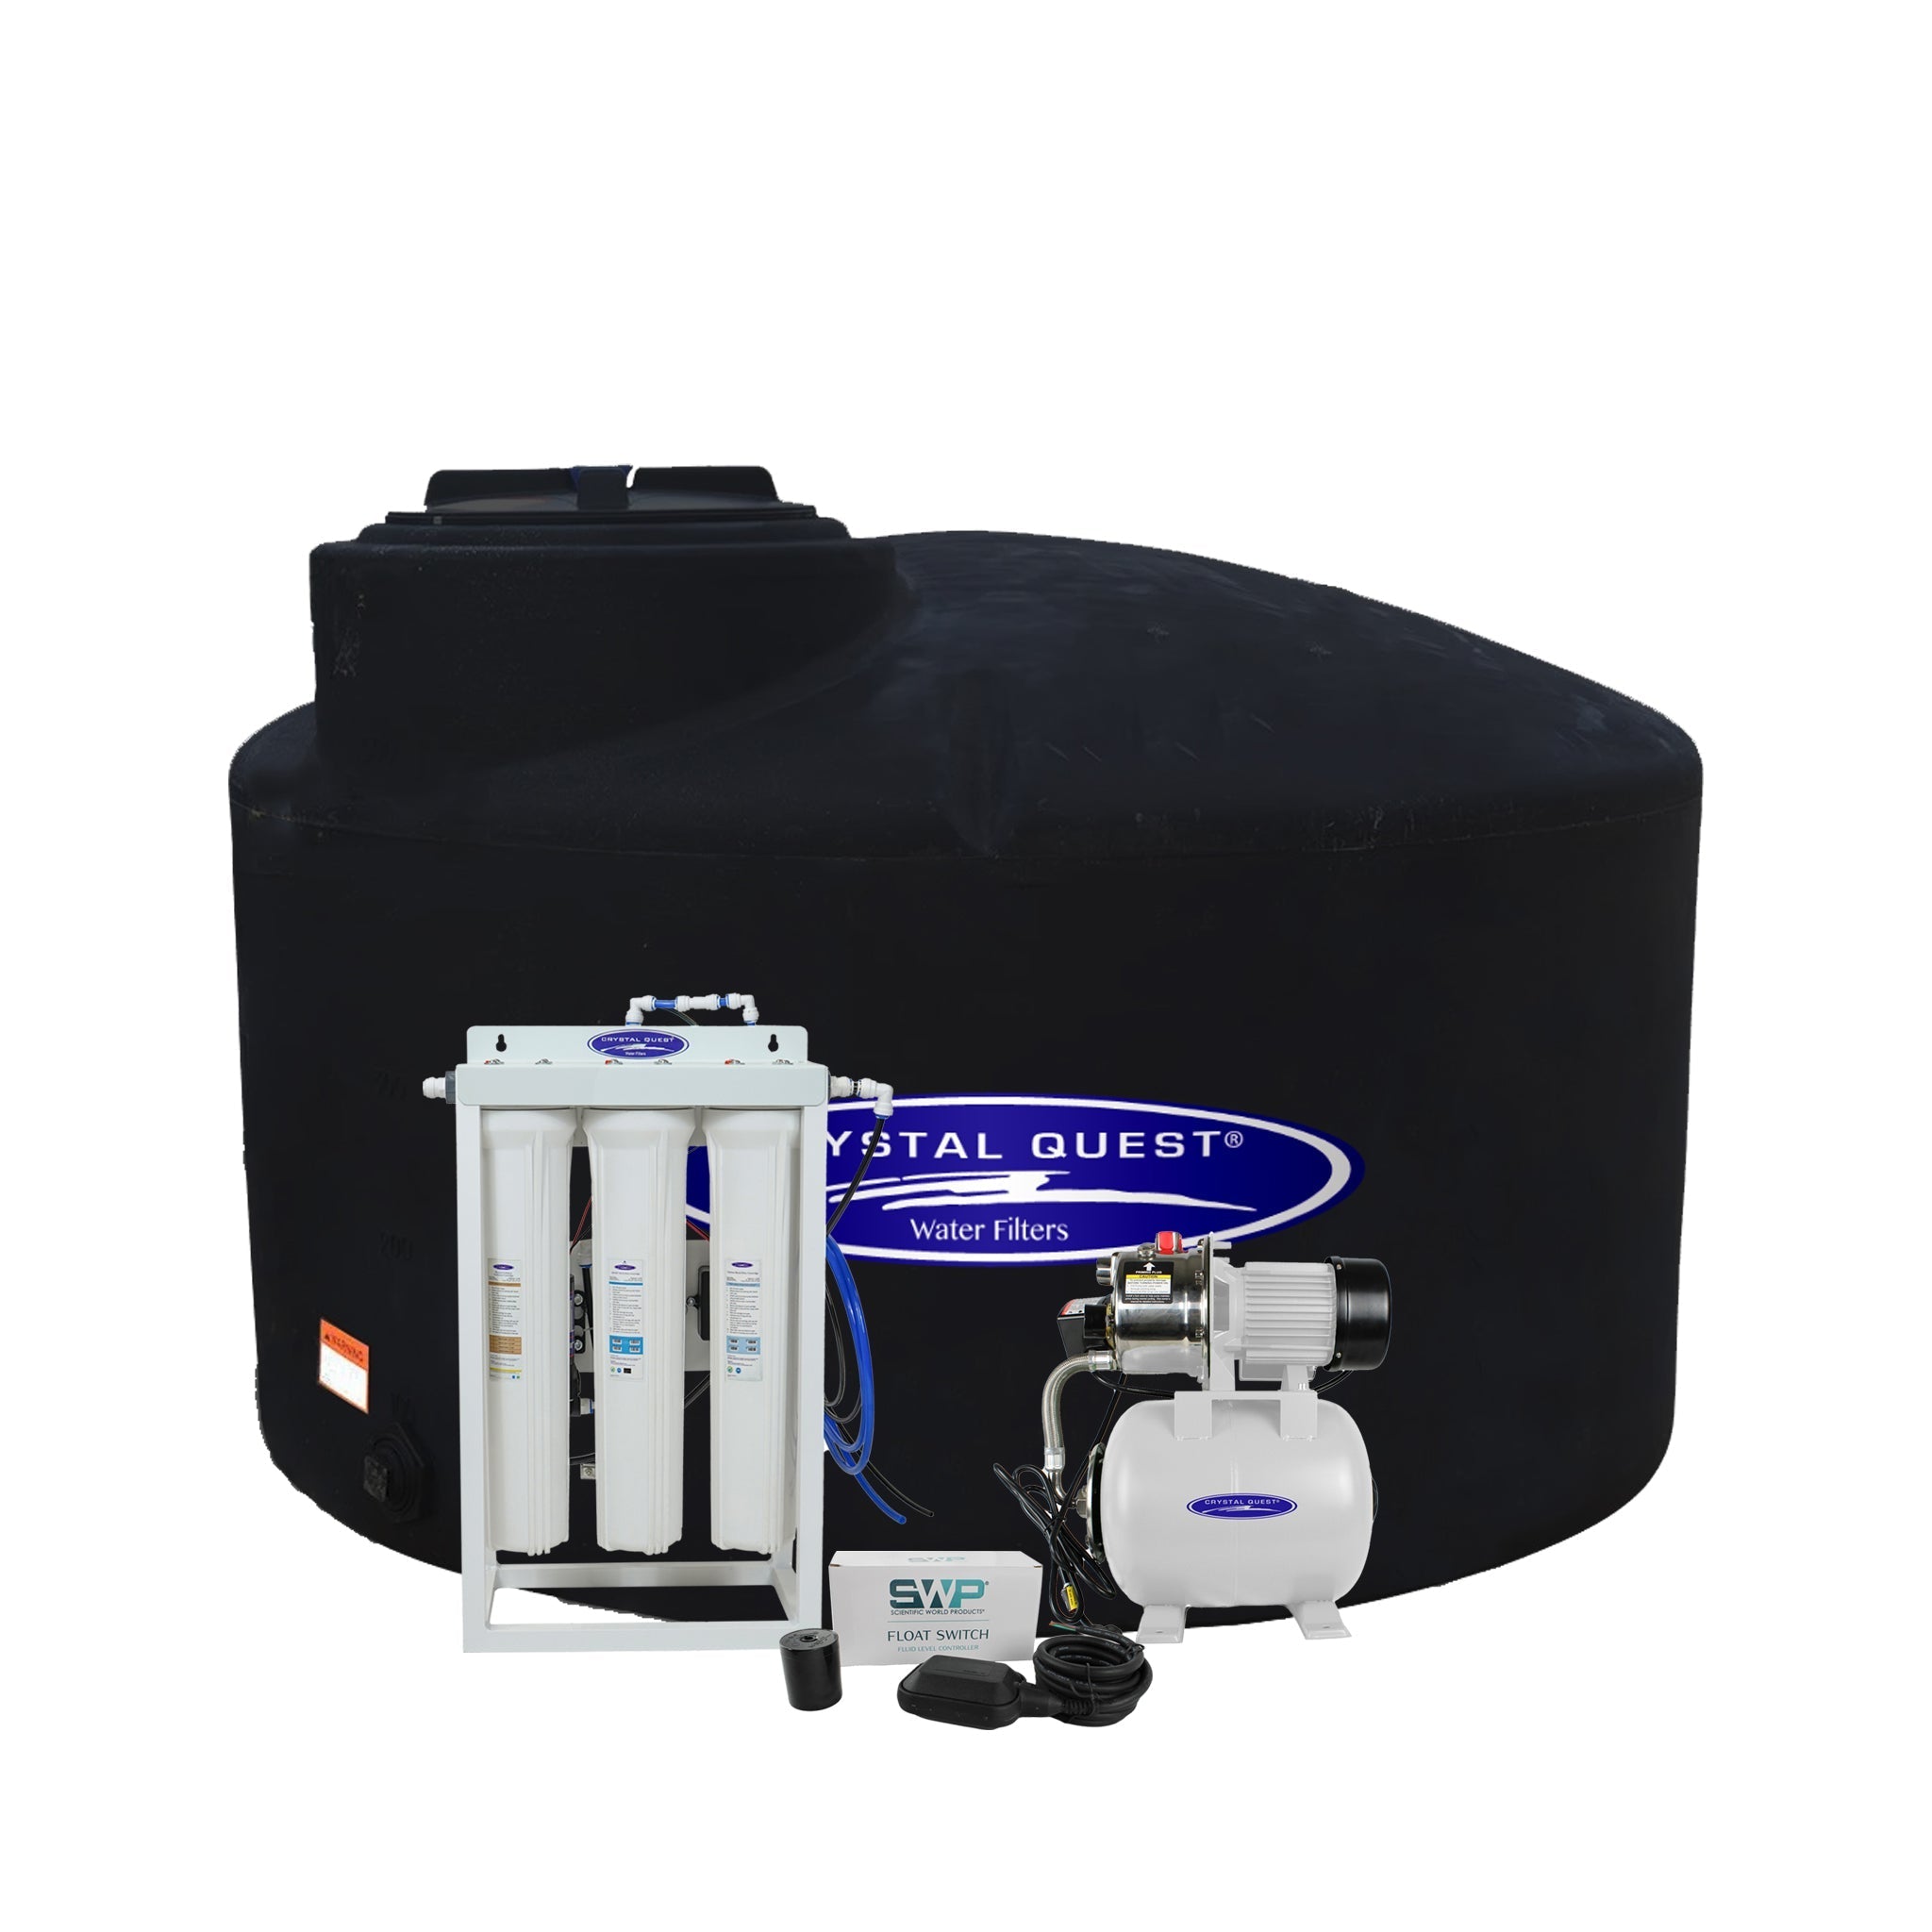 Crystal Quest Whole House Reverse Osmosis System 200 GPD RO Pump and 550 Gallon Storage Tank